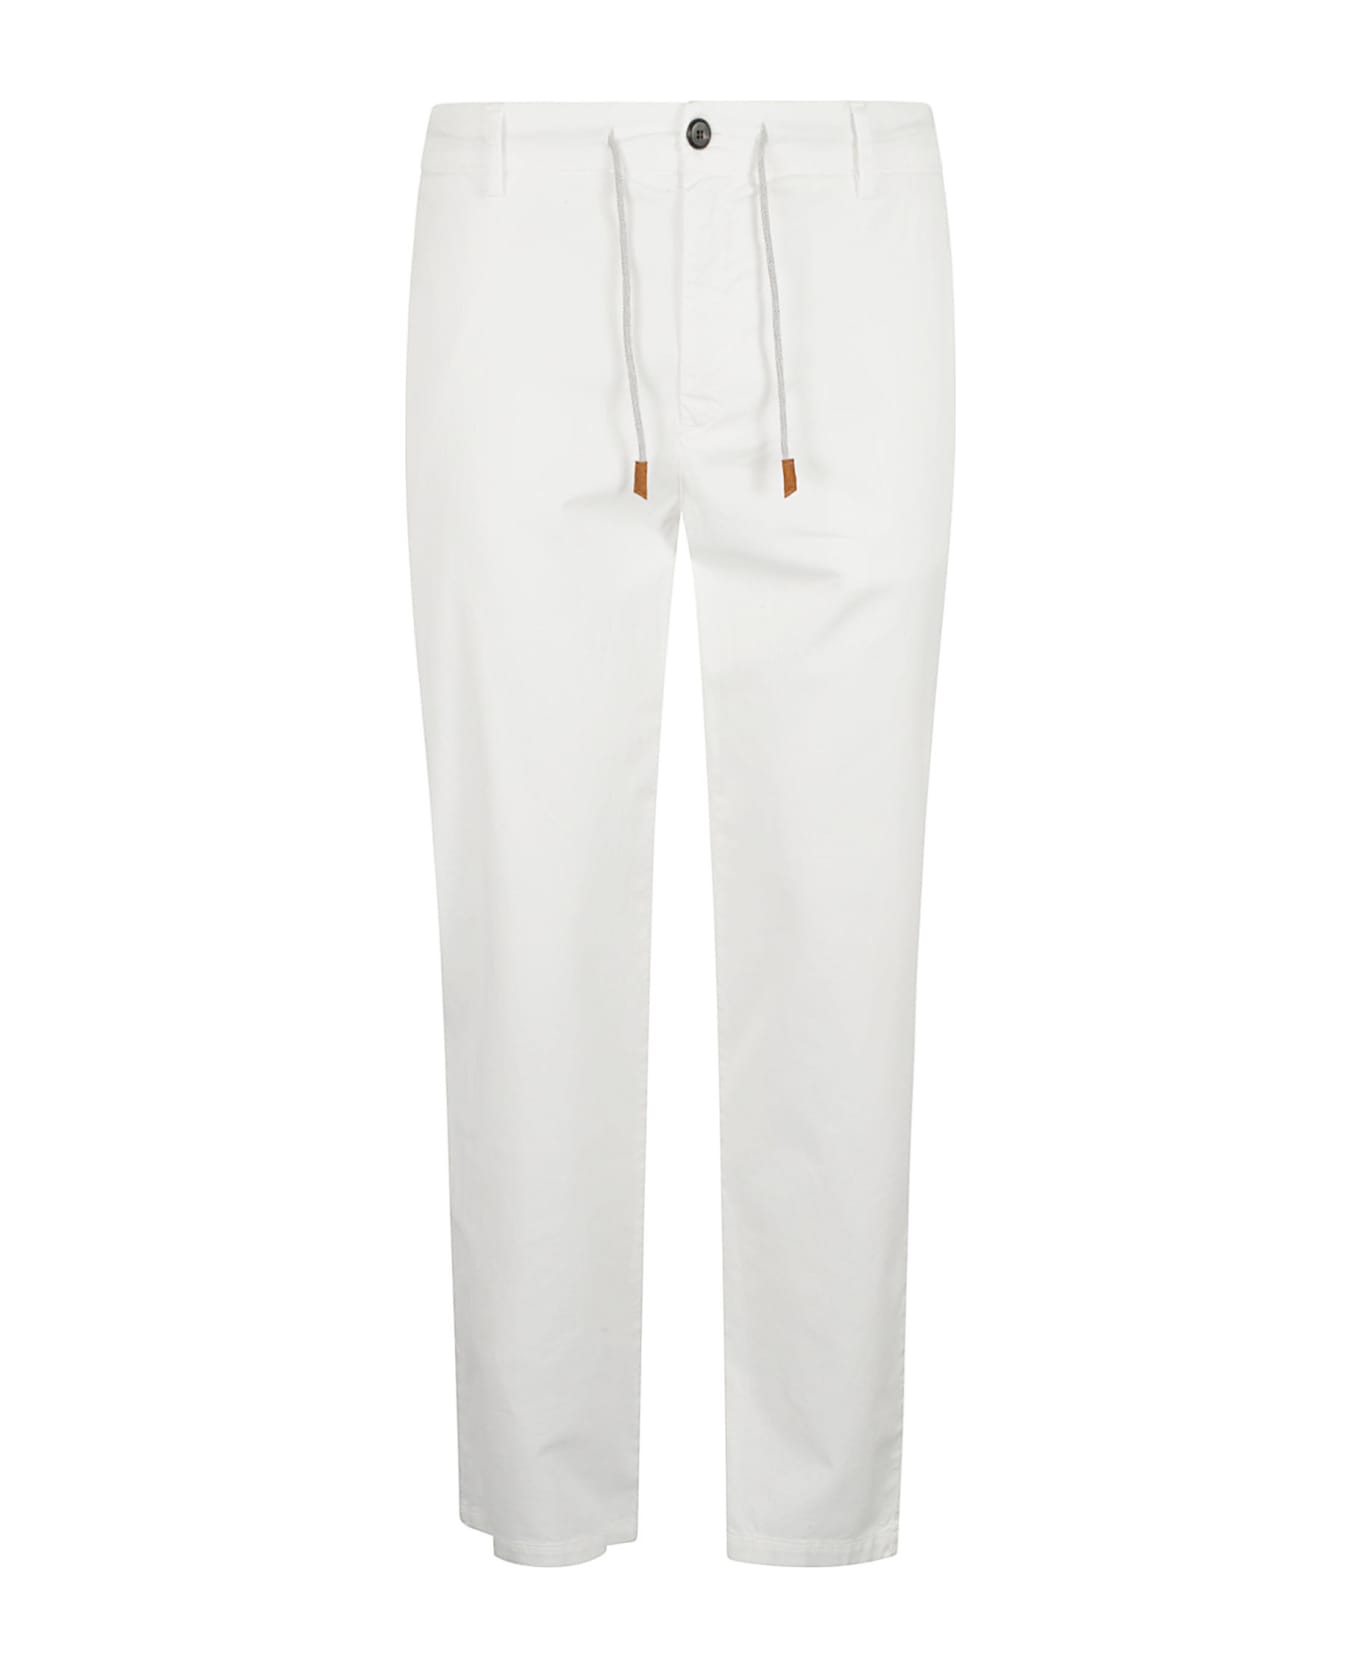 Eleventy Drawstringed Buttoned Trousers - White ボトムス